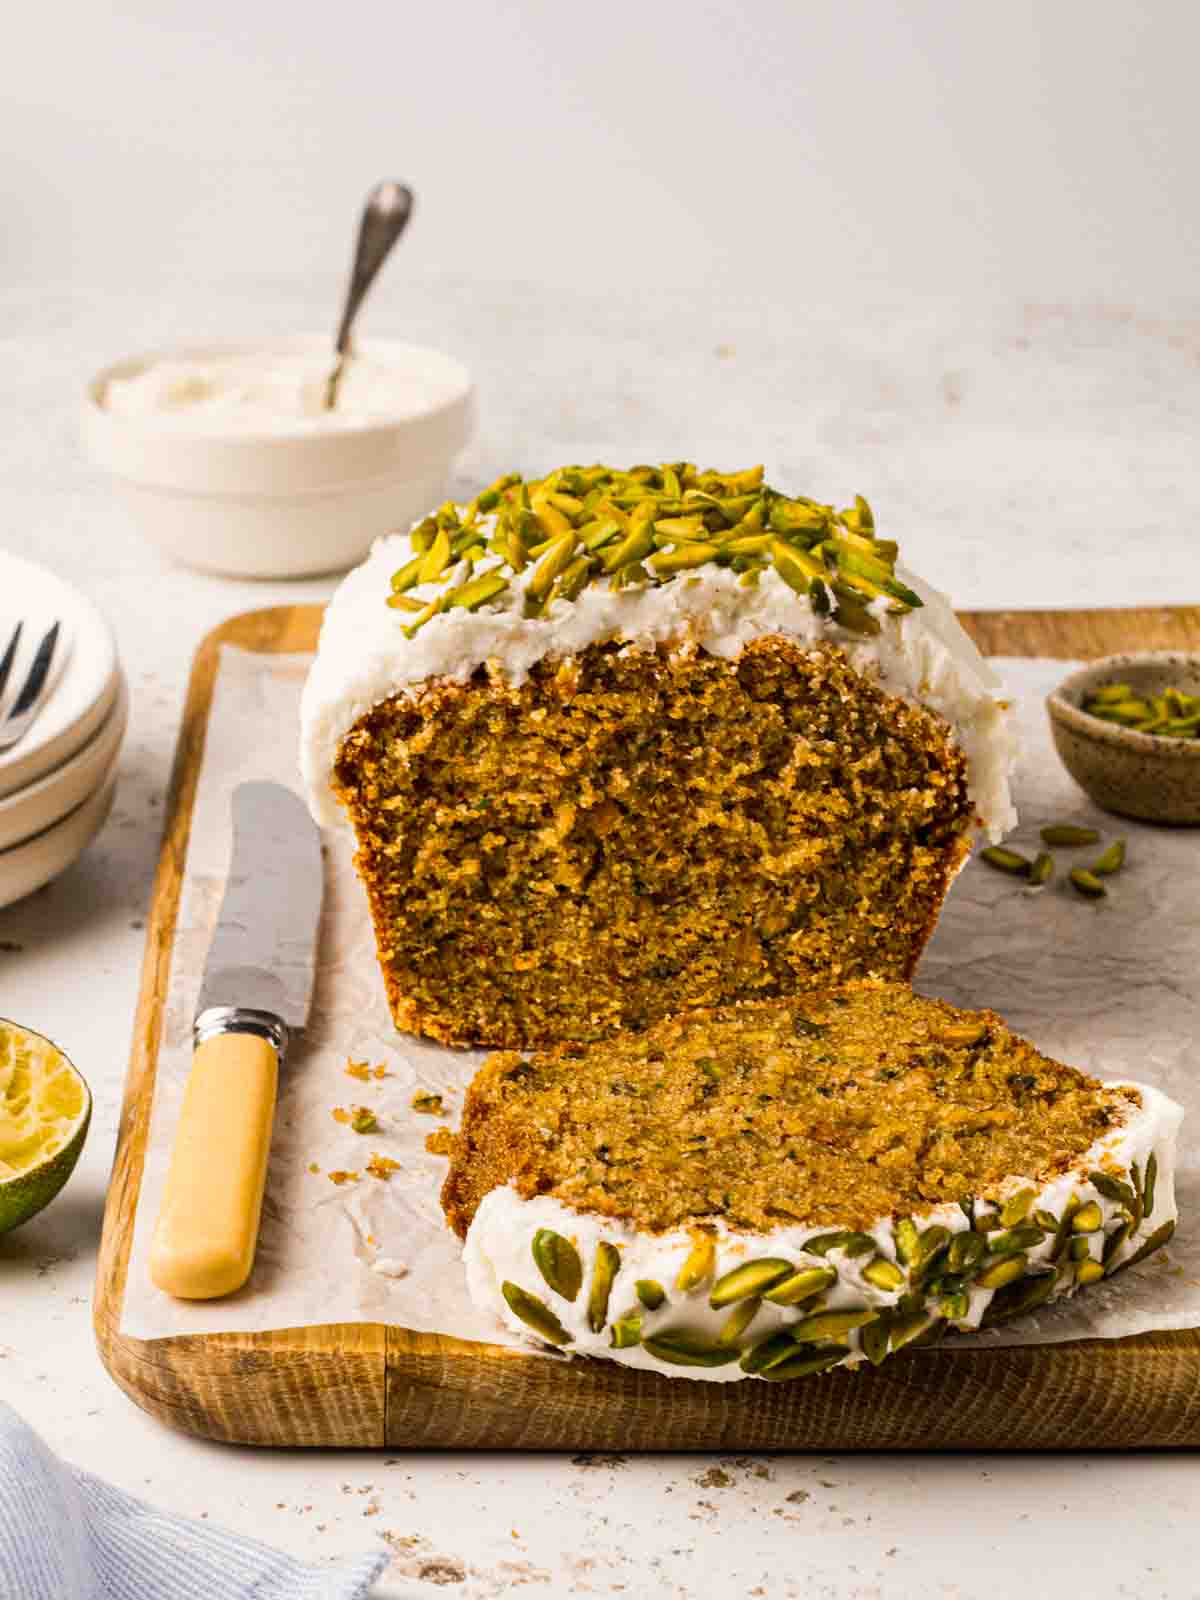 A sliced Courgette Cake from the side, on a board with a knife to the side and bowls and cutlery too.